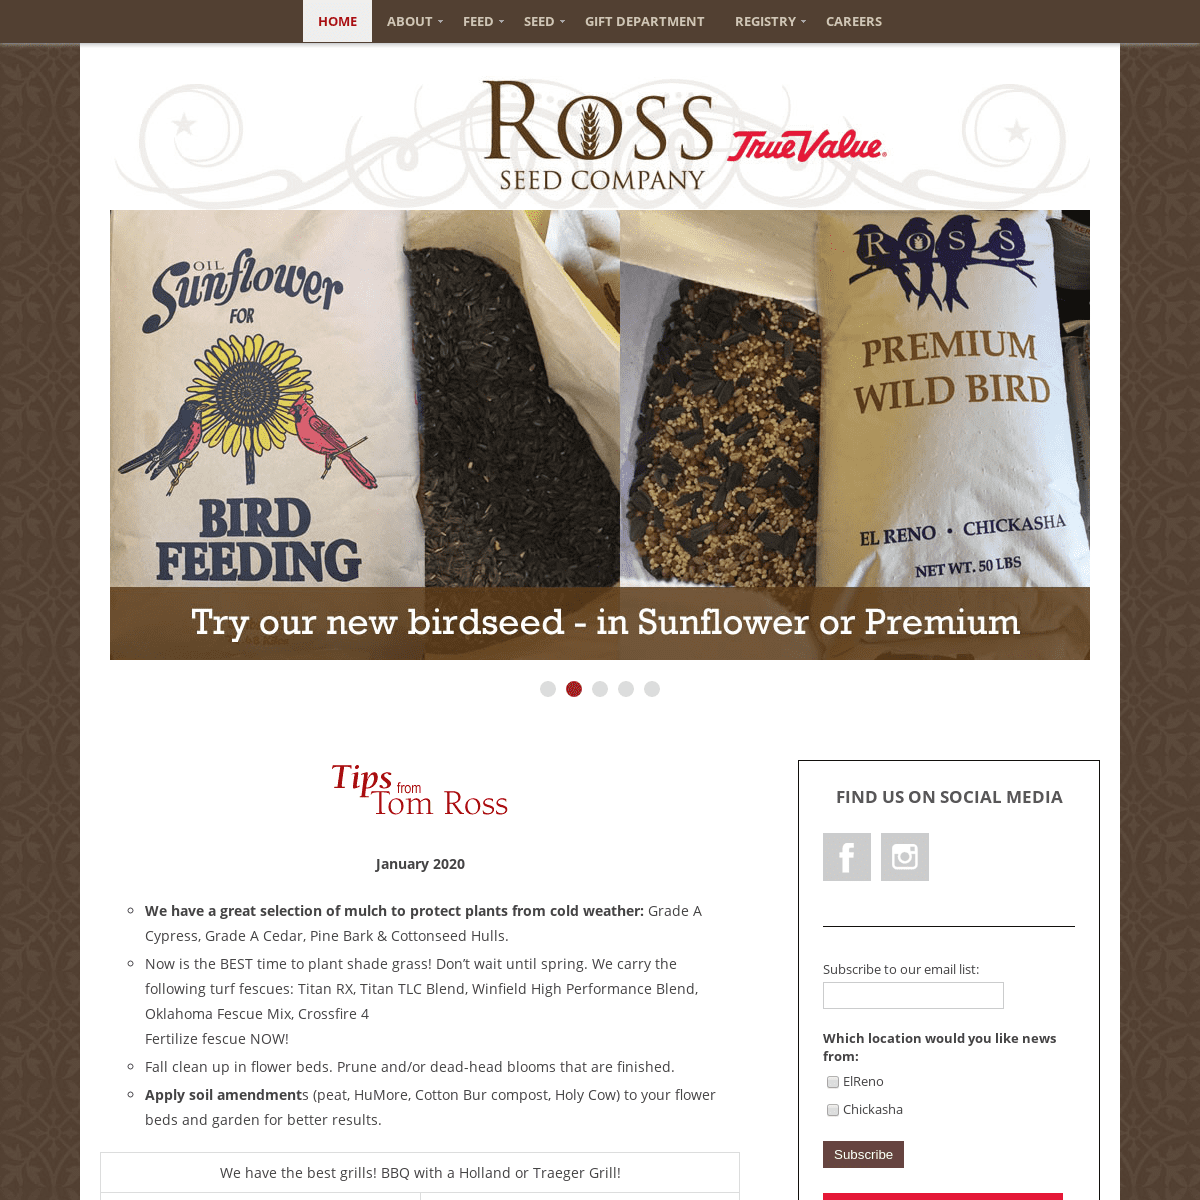 A complete backup of rossseed.com